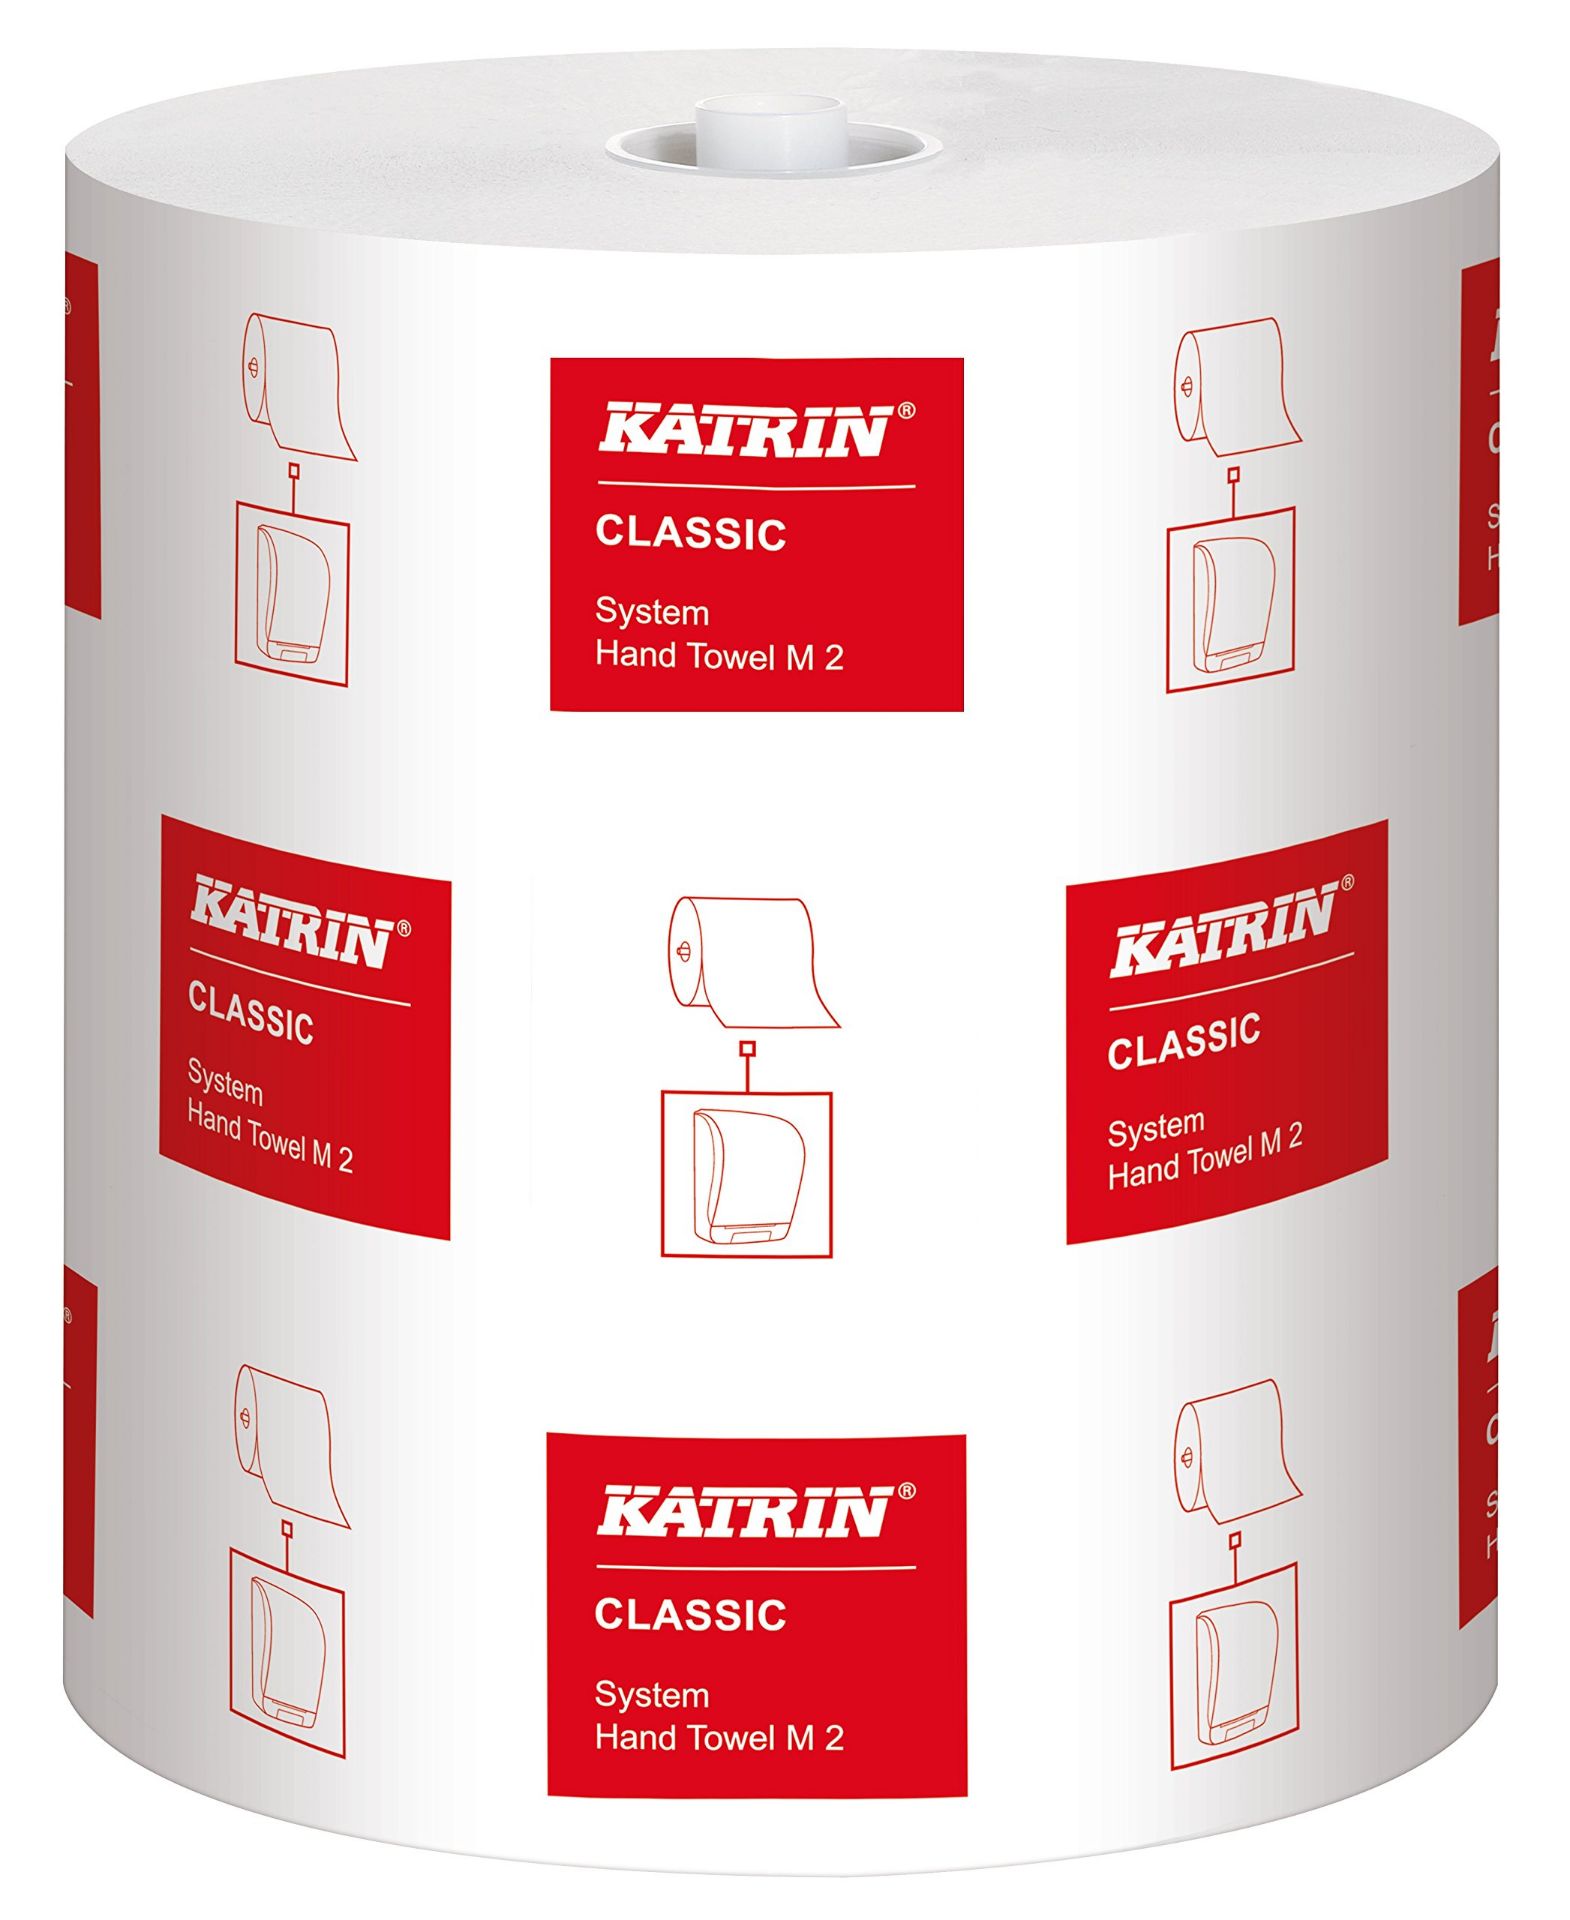 5 X BRAND NEW PACKS OF 6 KATRIN 460102 SYSTEM HAND TOWELS M 2 R9-4